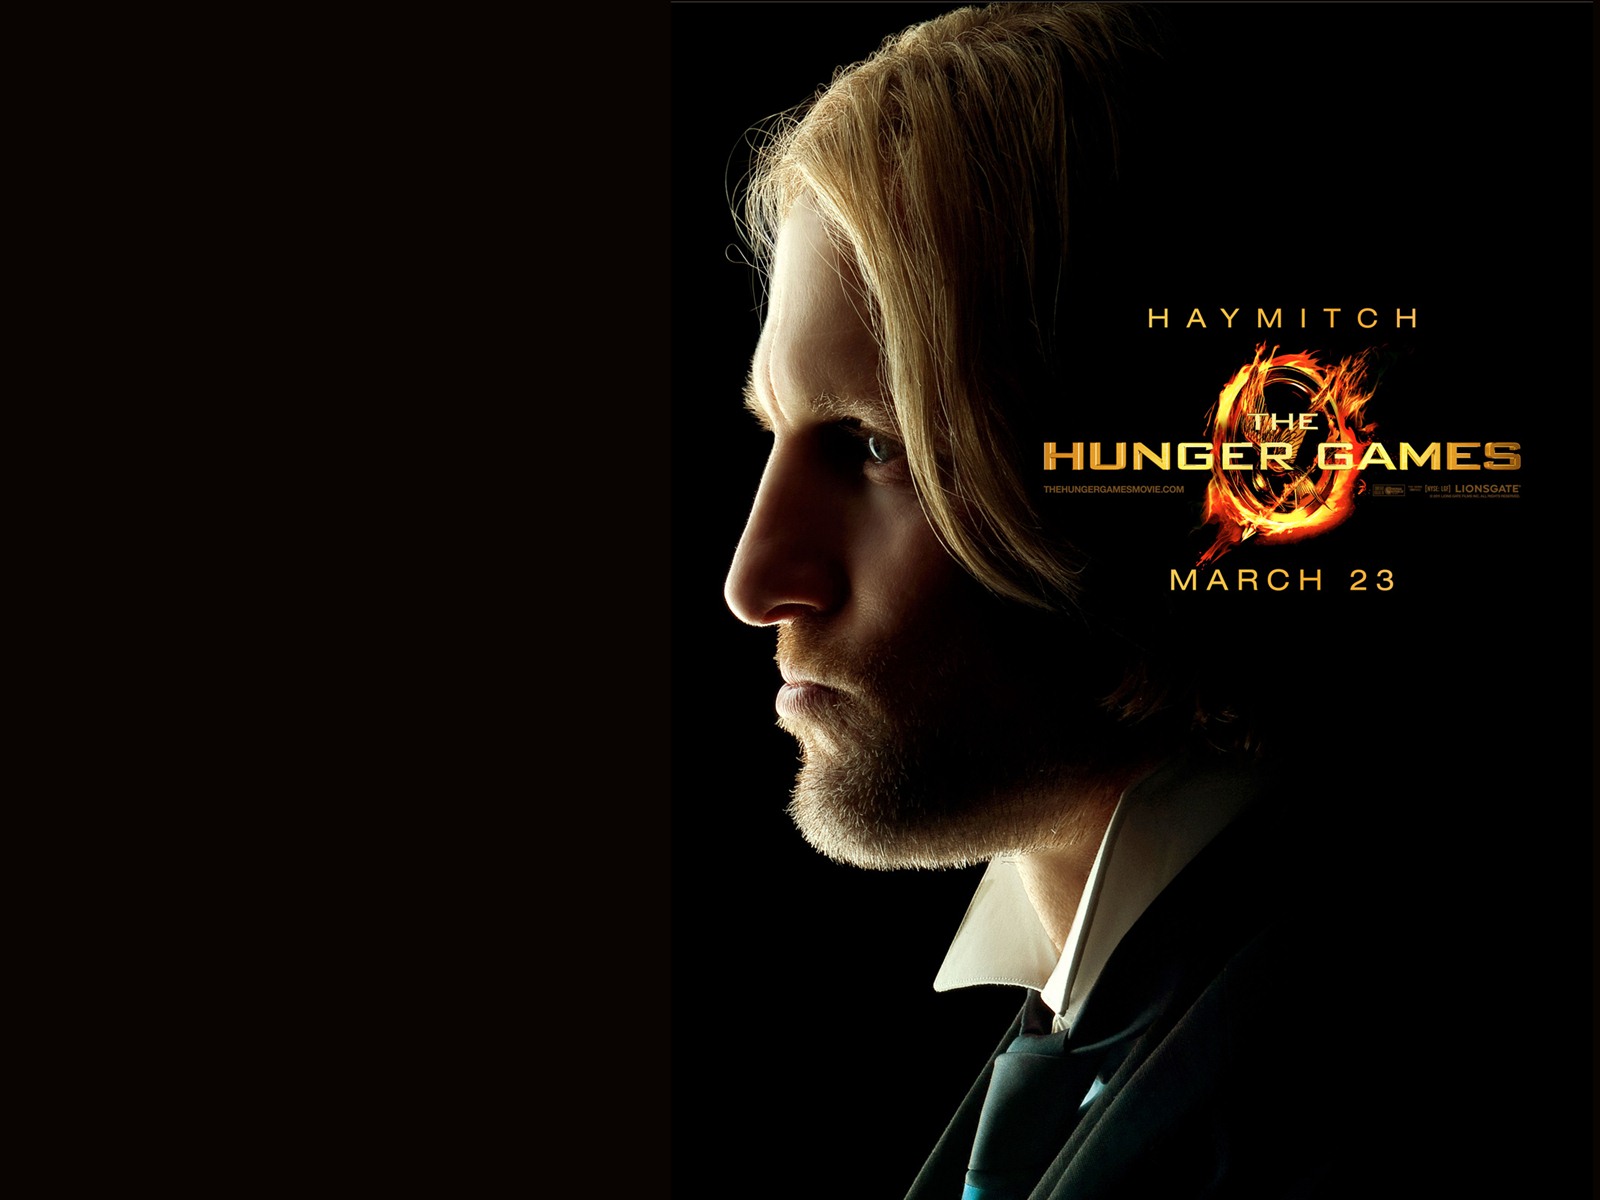 The Hunger Games HD wallpapers #12 - 1600x1200